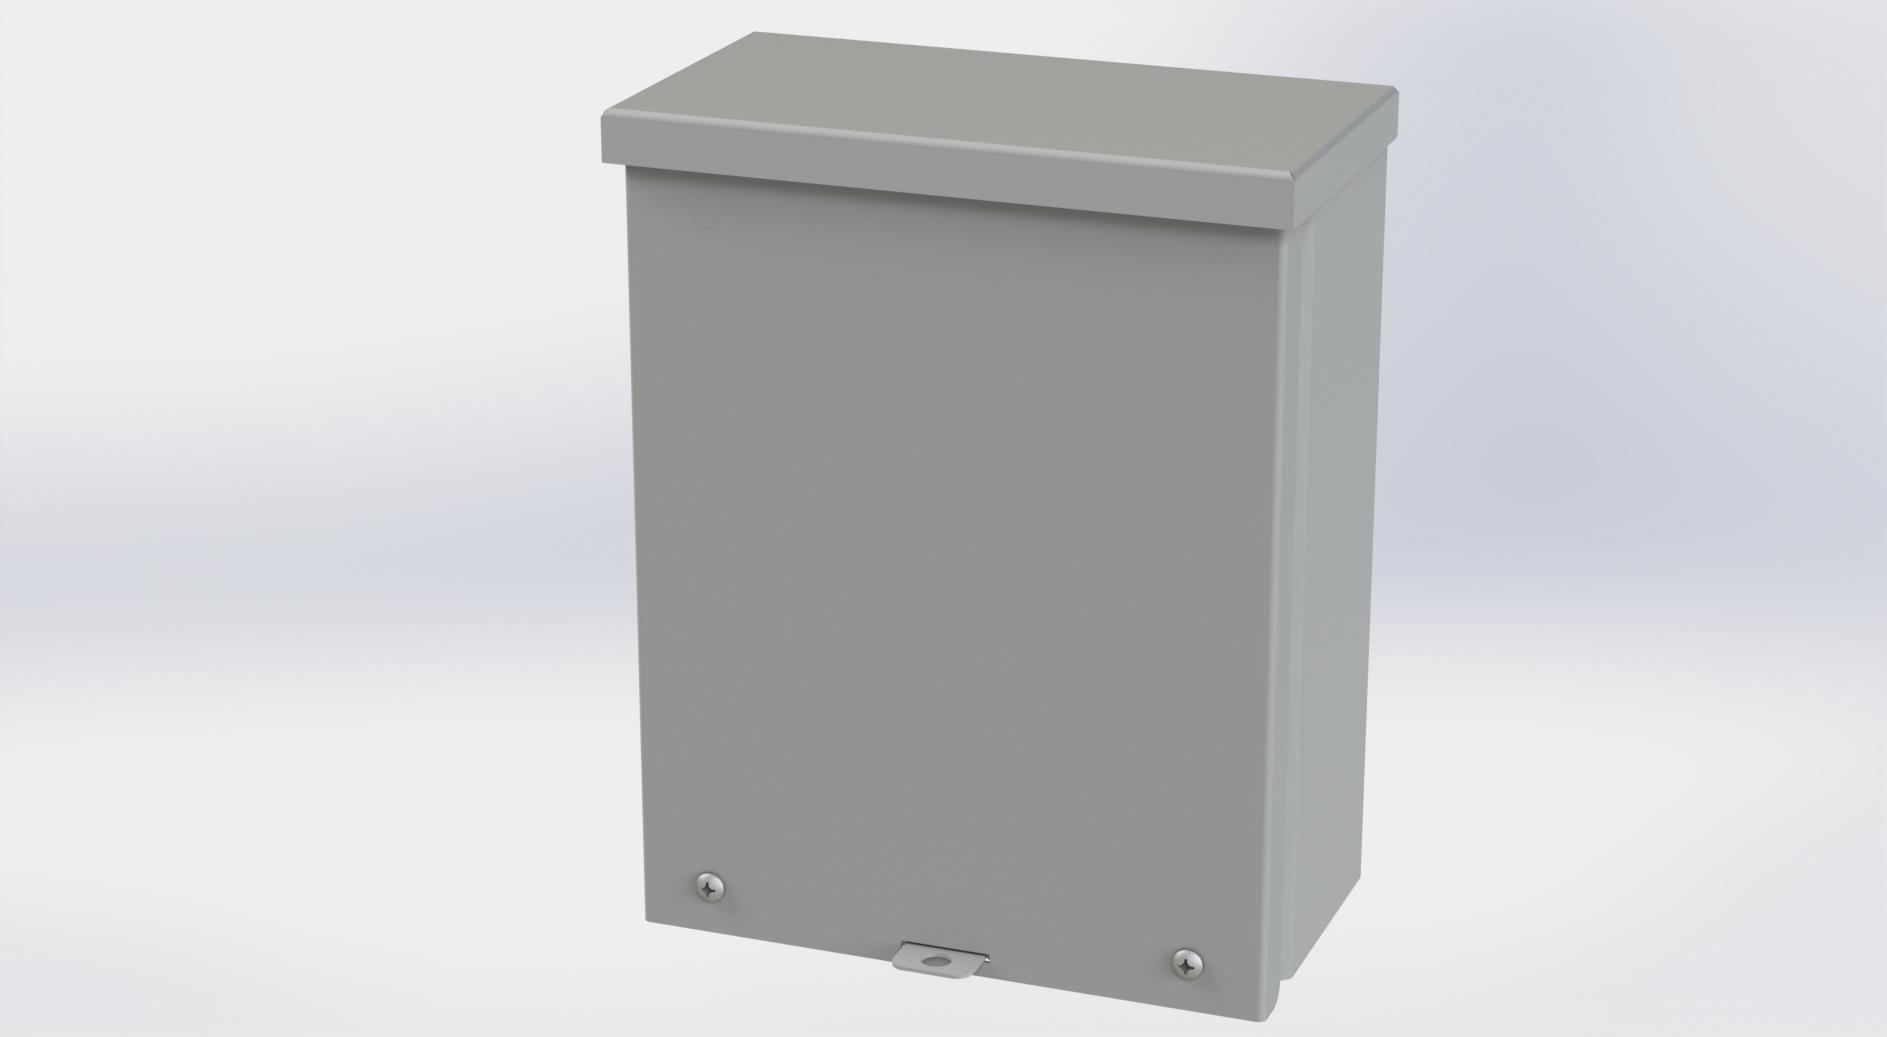 Saginaw Control SCE-10R84 Type-3R Screw Cover Enclosure, Height:10.00", Width:8.00", Depth:4.00", ANSI-61 gray powder coating inside and out.